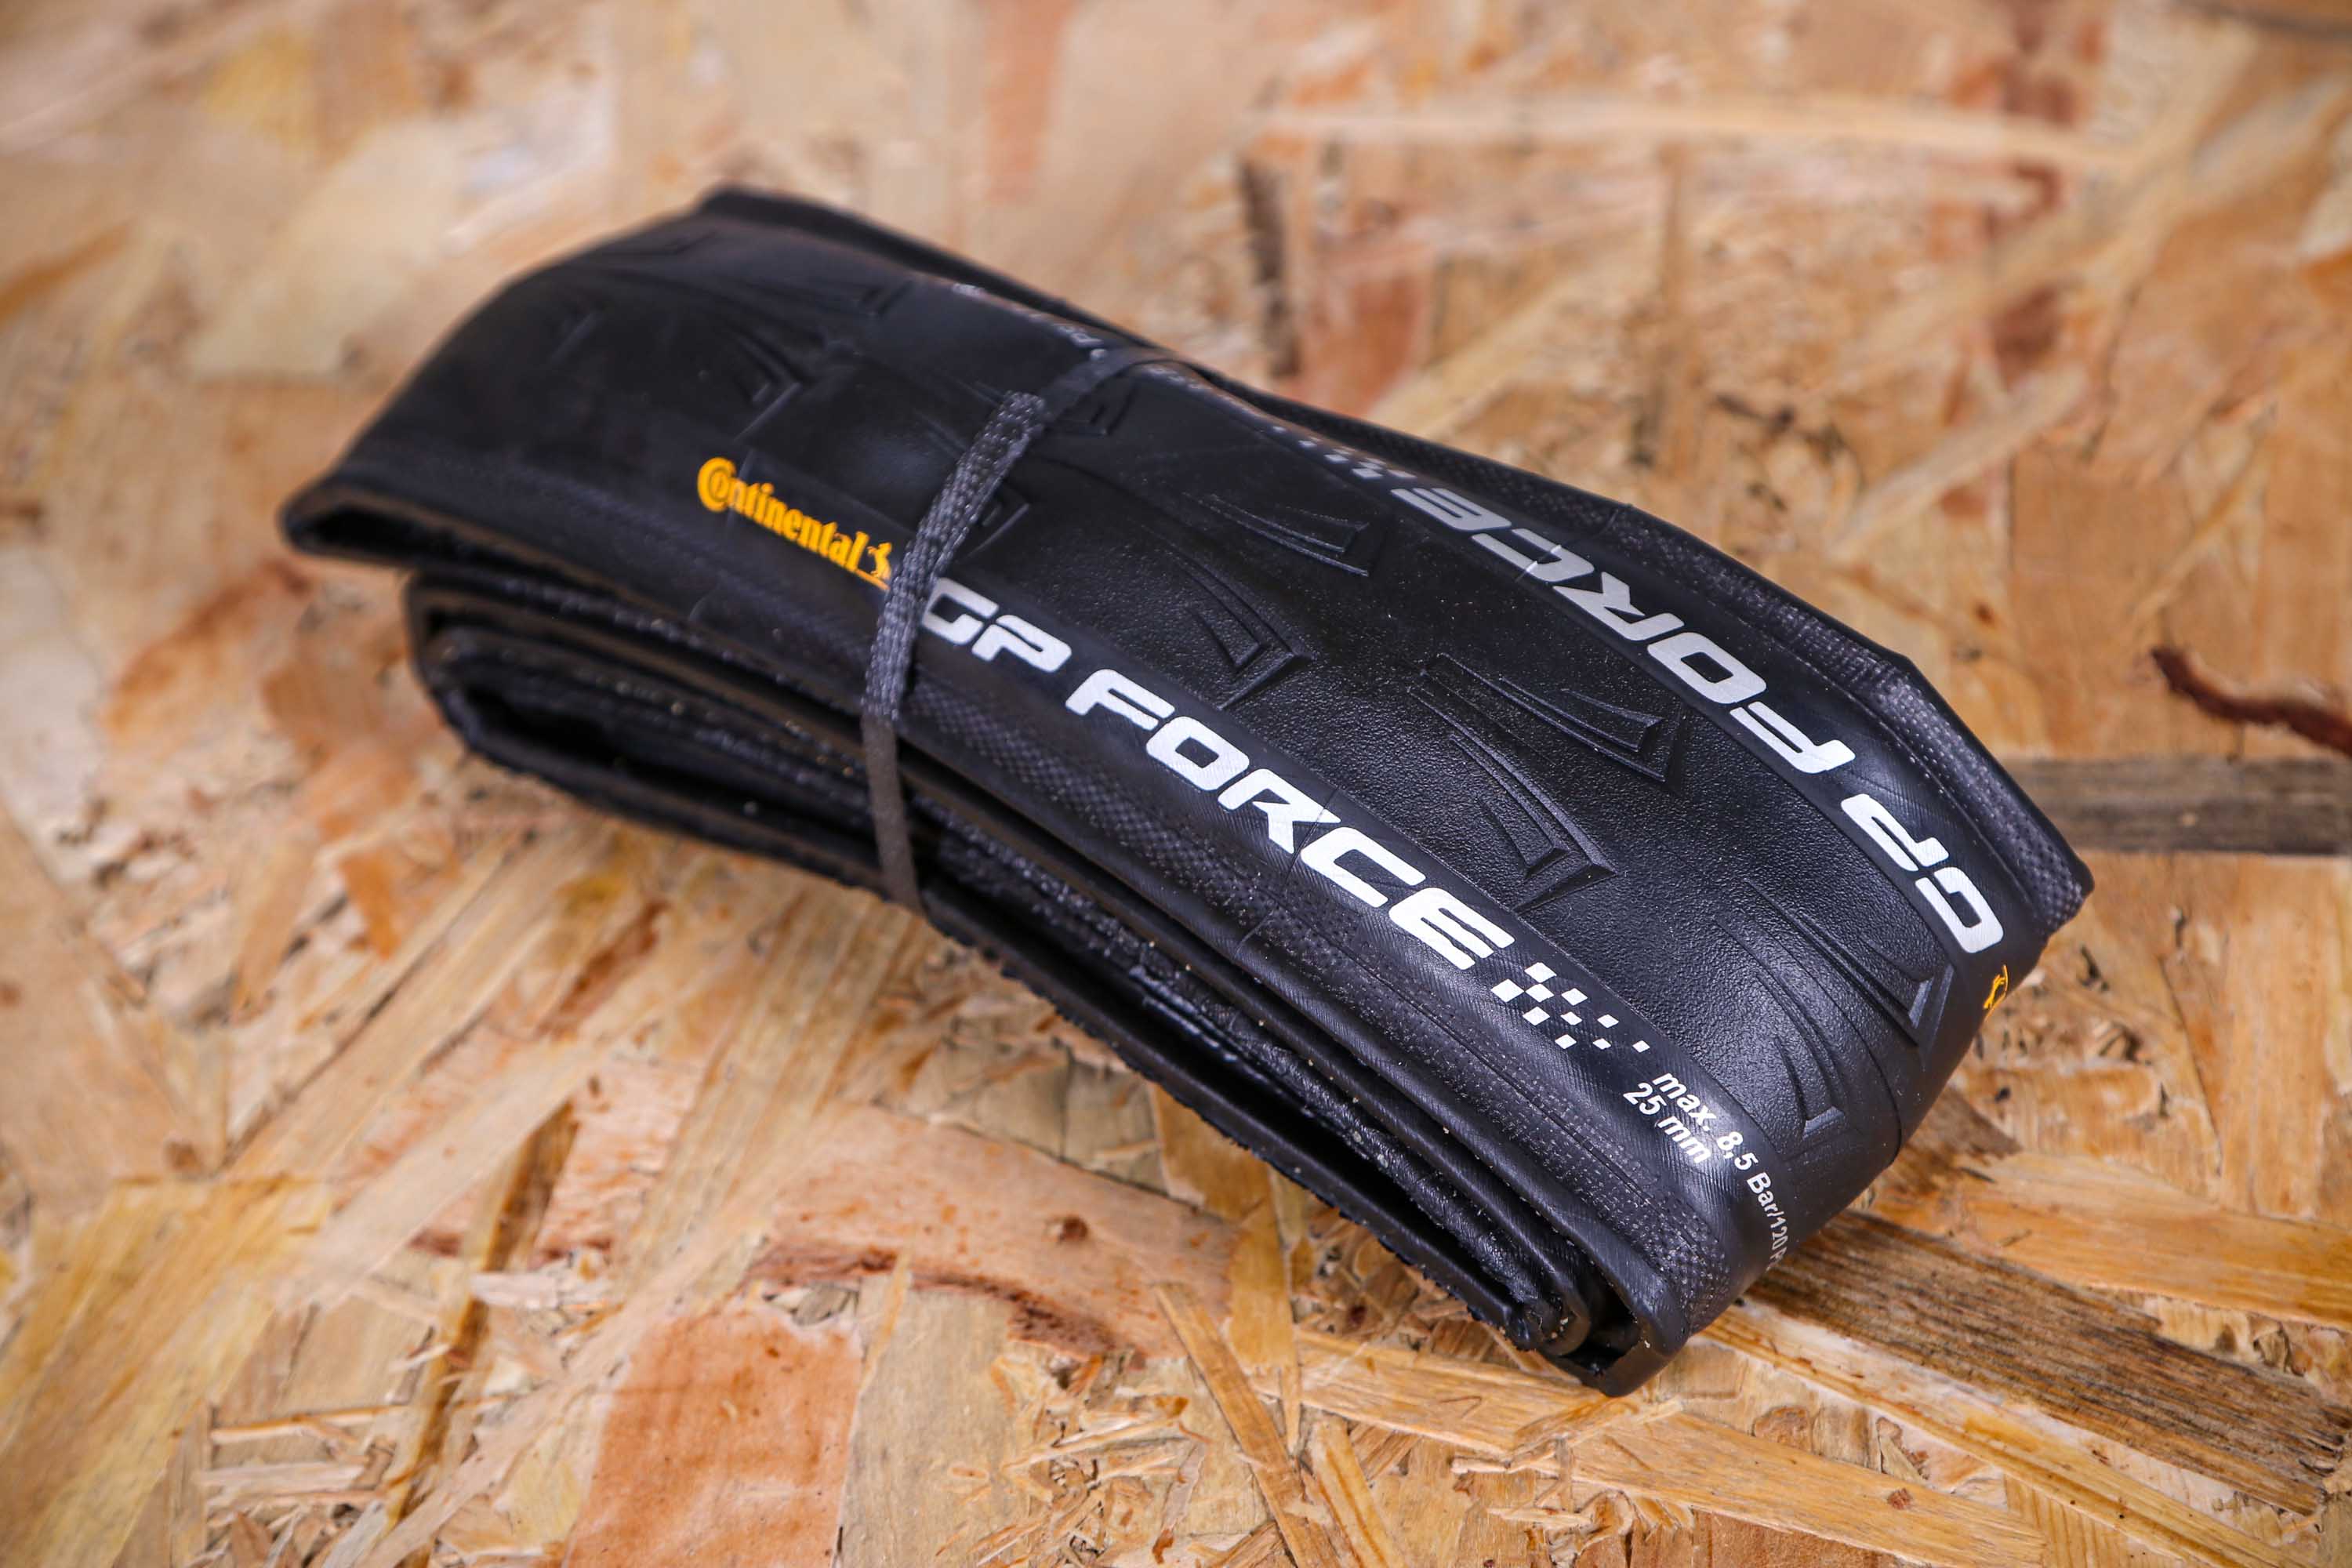 Review: Continental Grand Prix Attack and Force tyres | road.cc